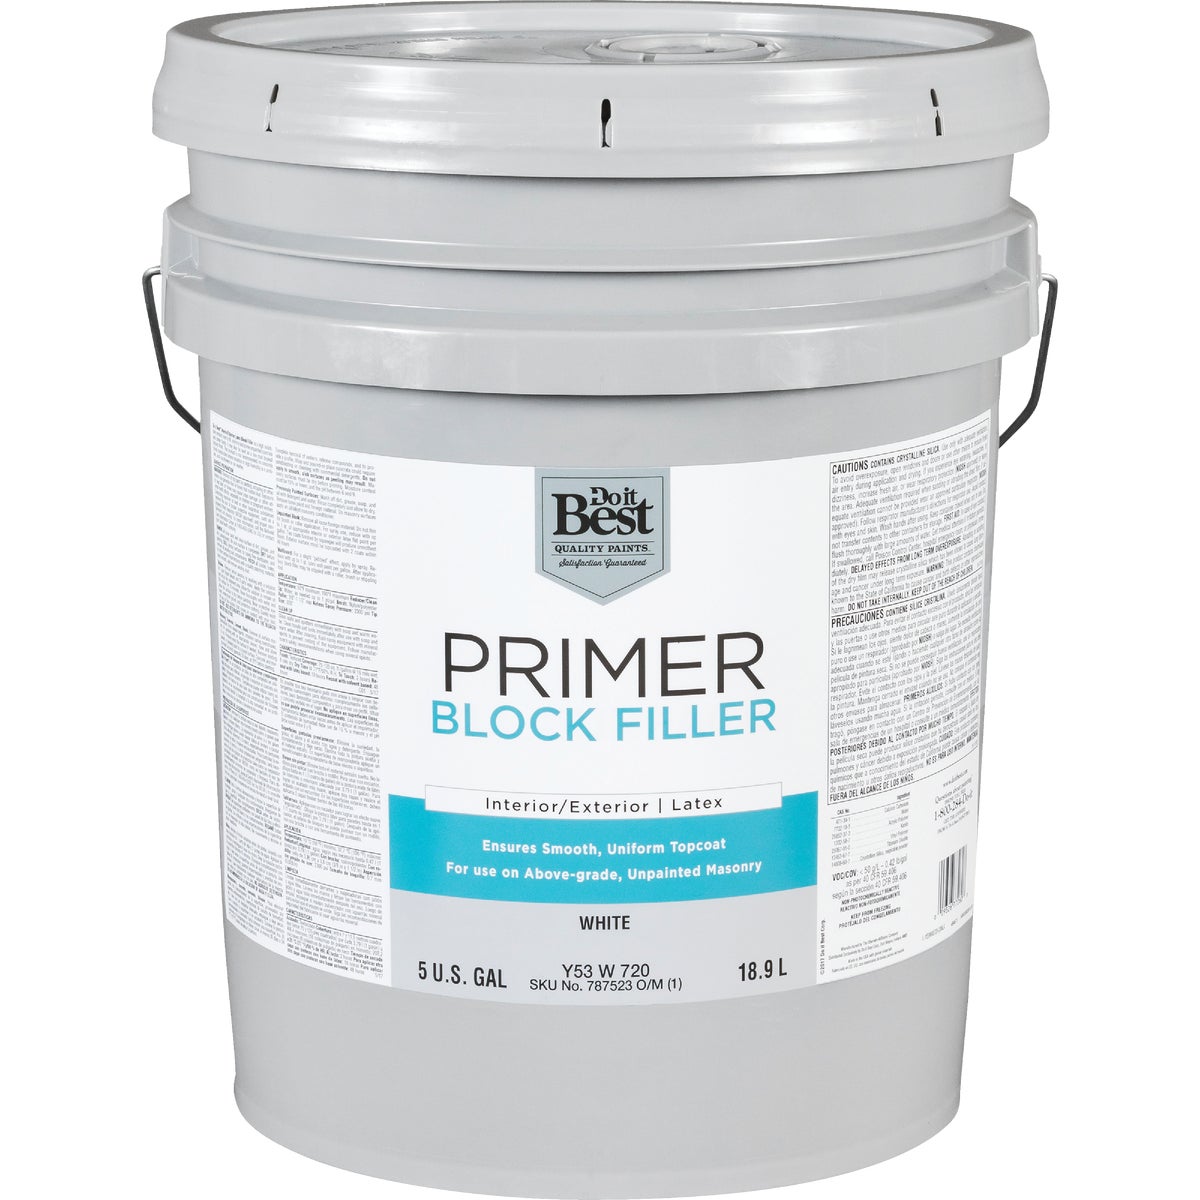 Item 787523, A high solids, pigmented latex product for use as either a block filler or 